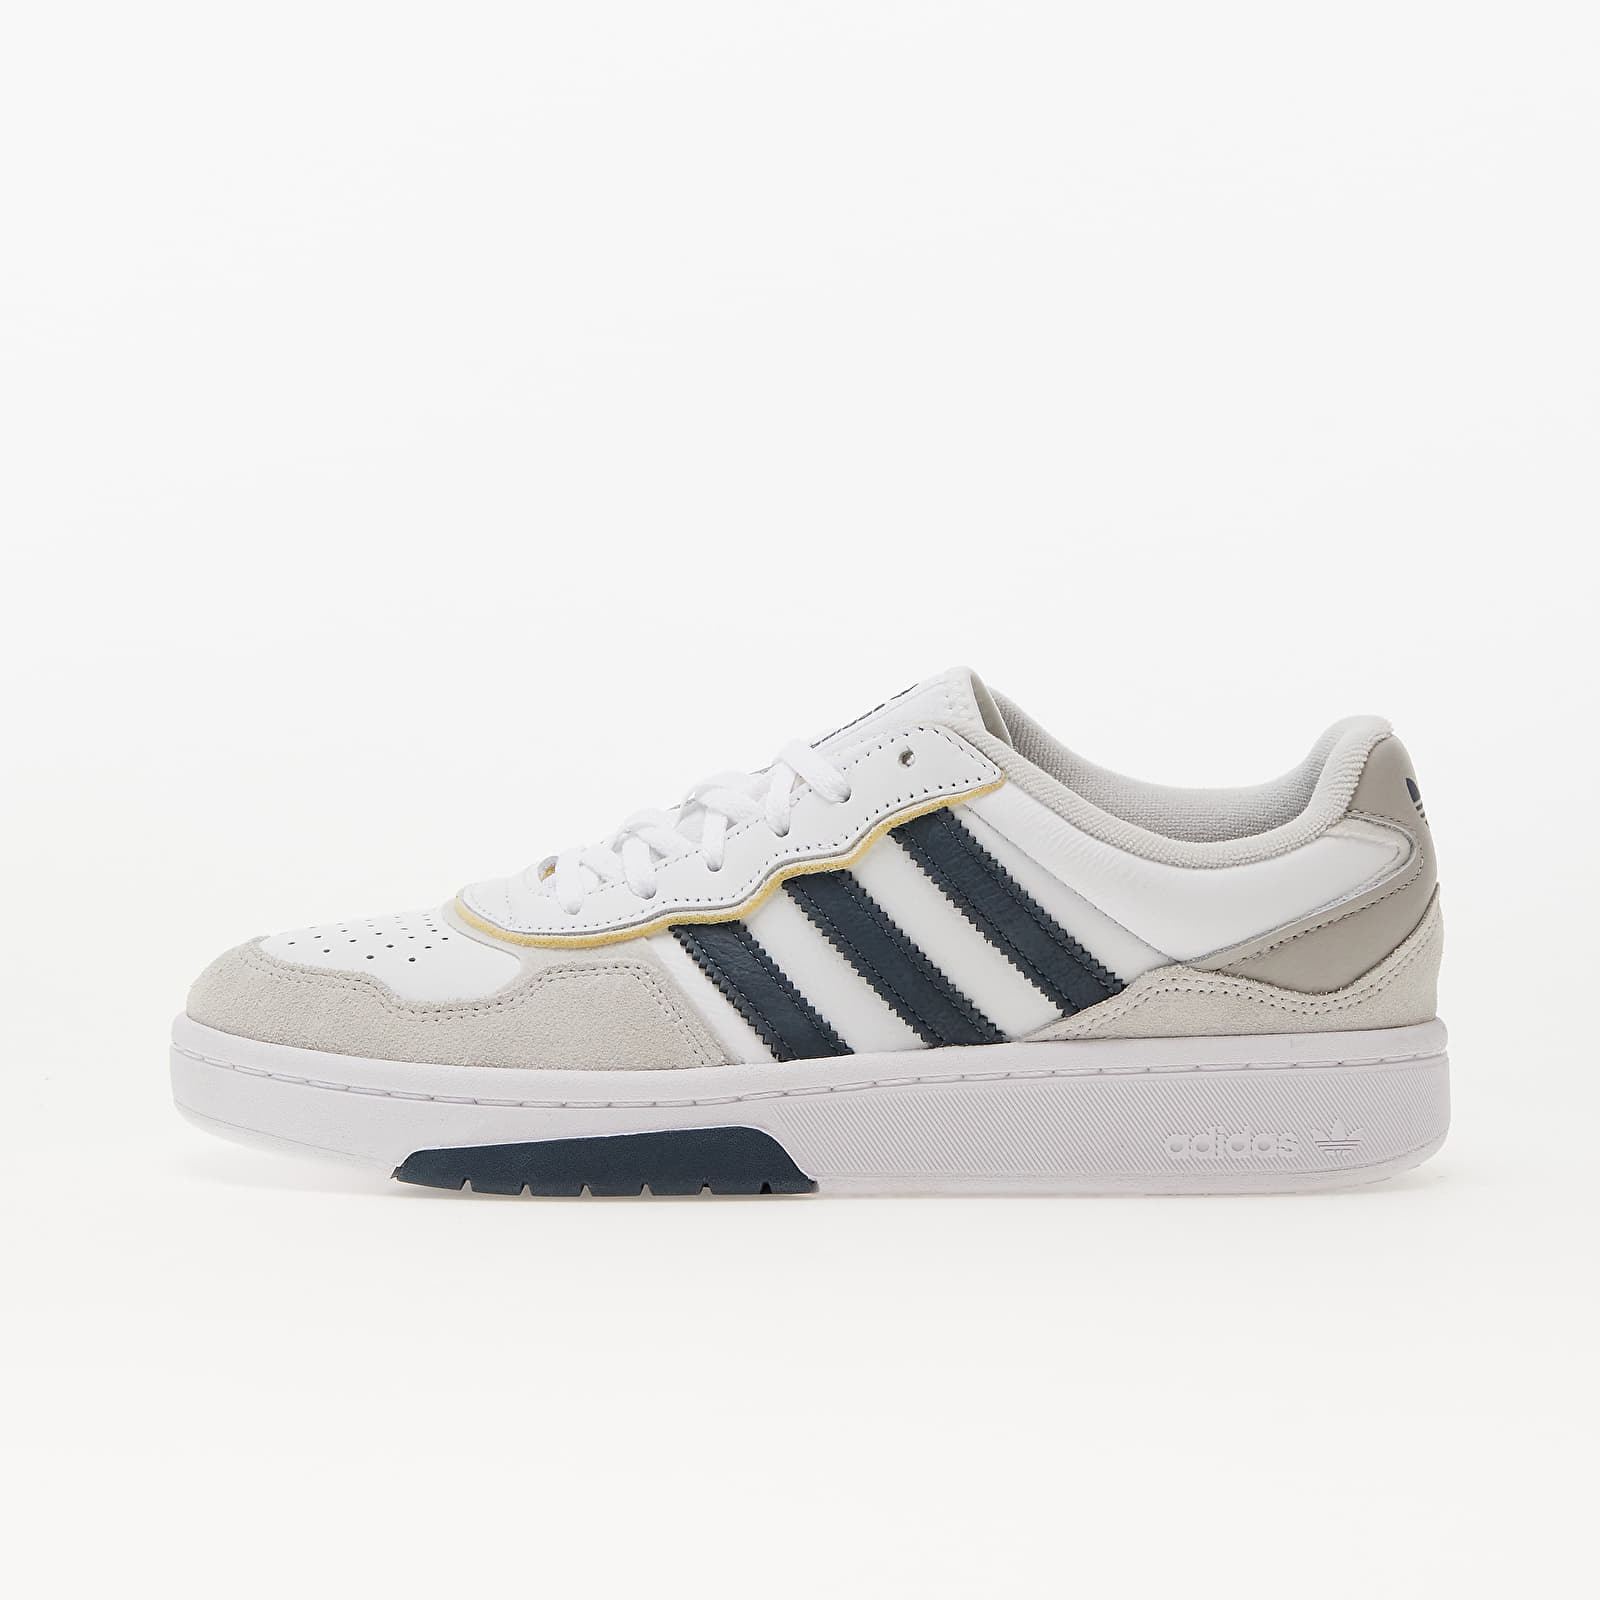 Men's shoes adidas Courtic Ftwr White/ Grey One/ Grey One